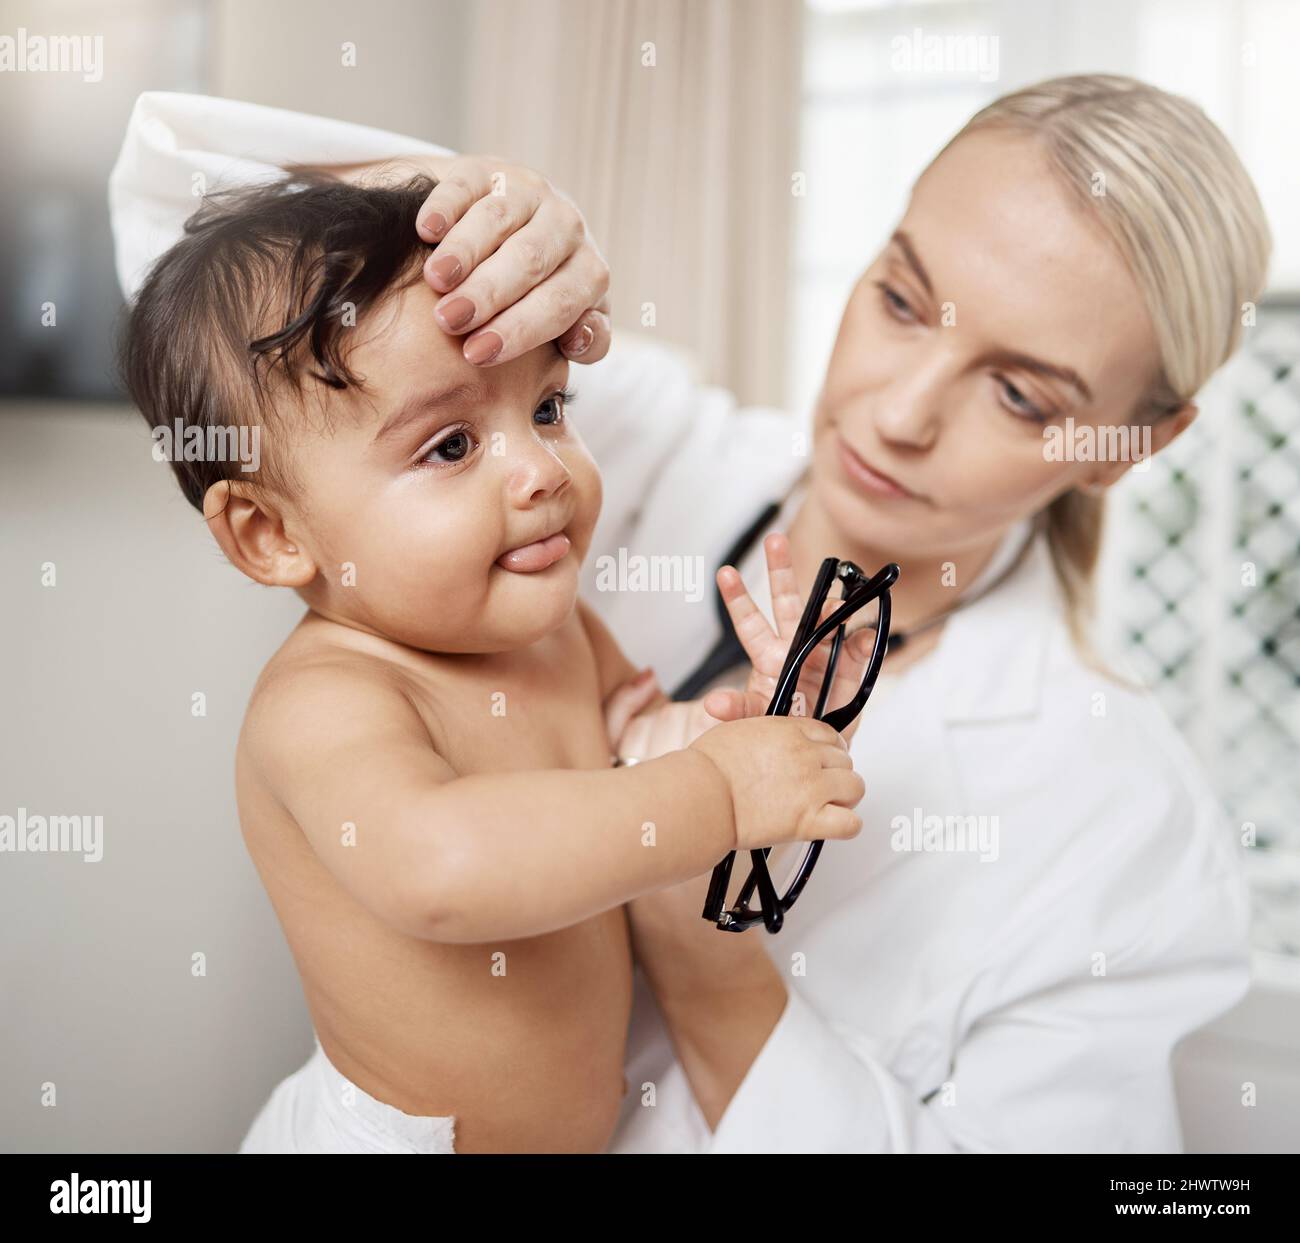 She definitely have a fever. Shot of a paediatrician taking a babys temperature. Stock Photo